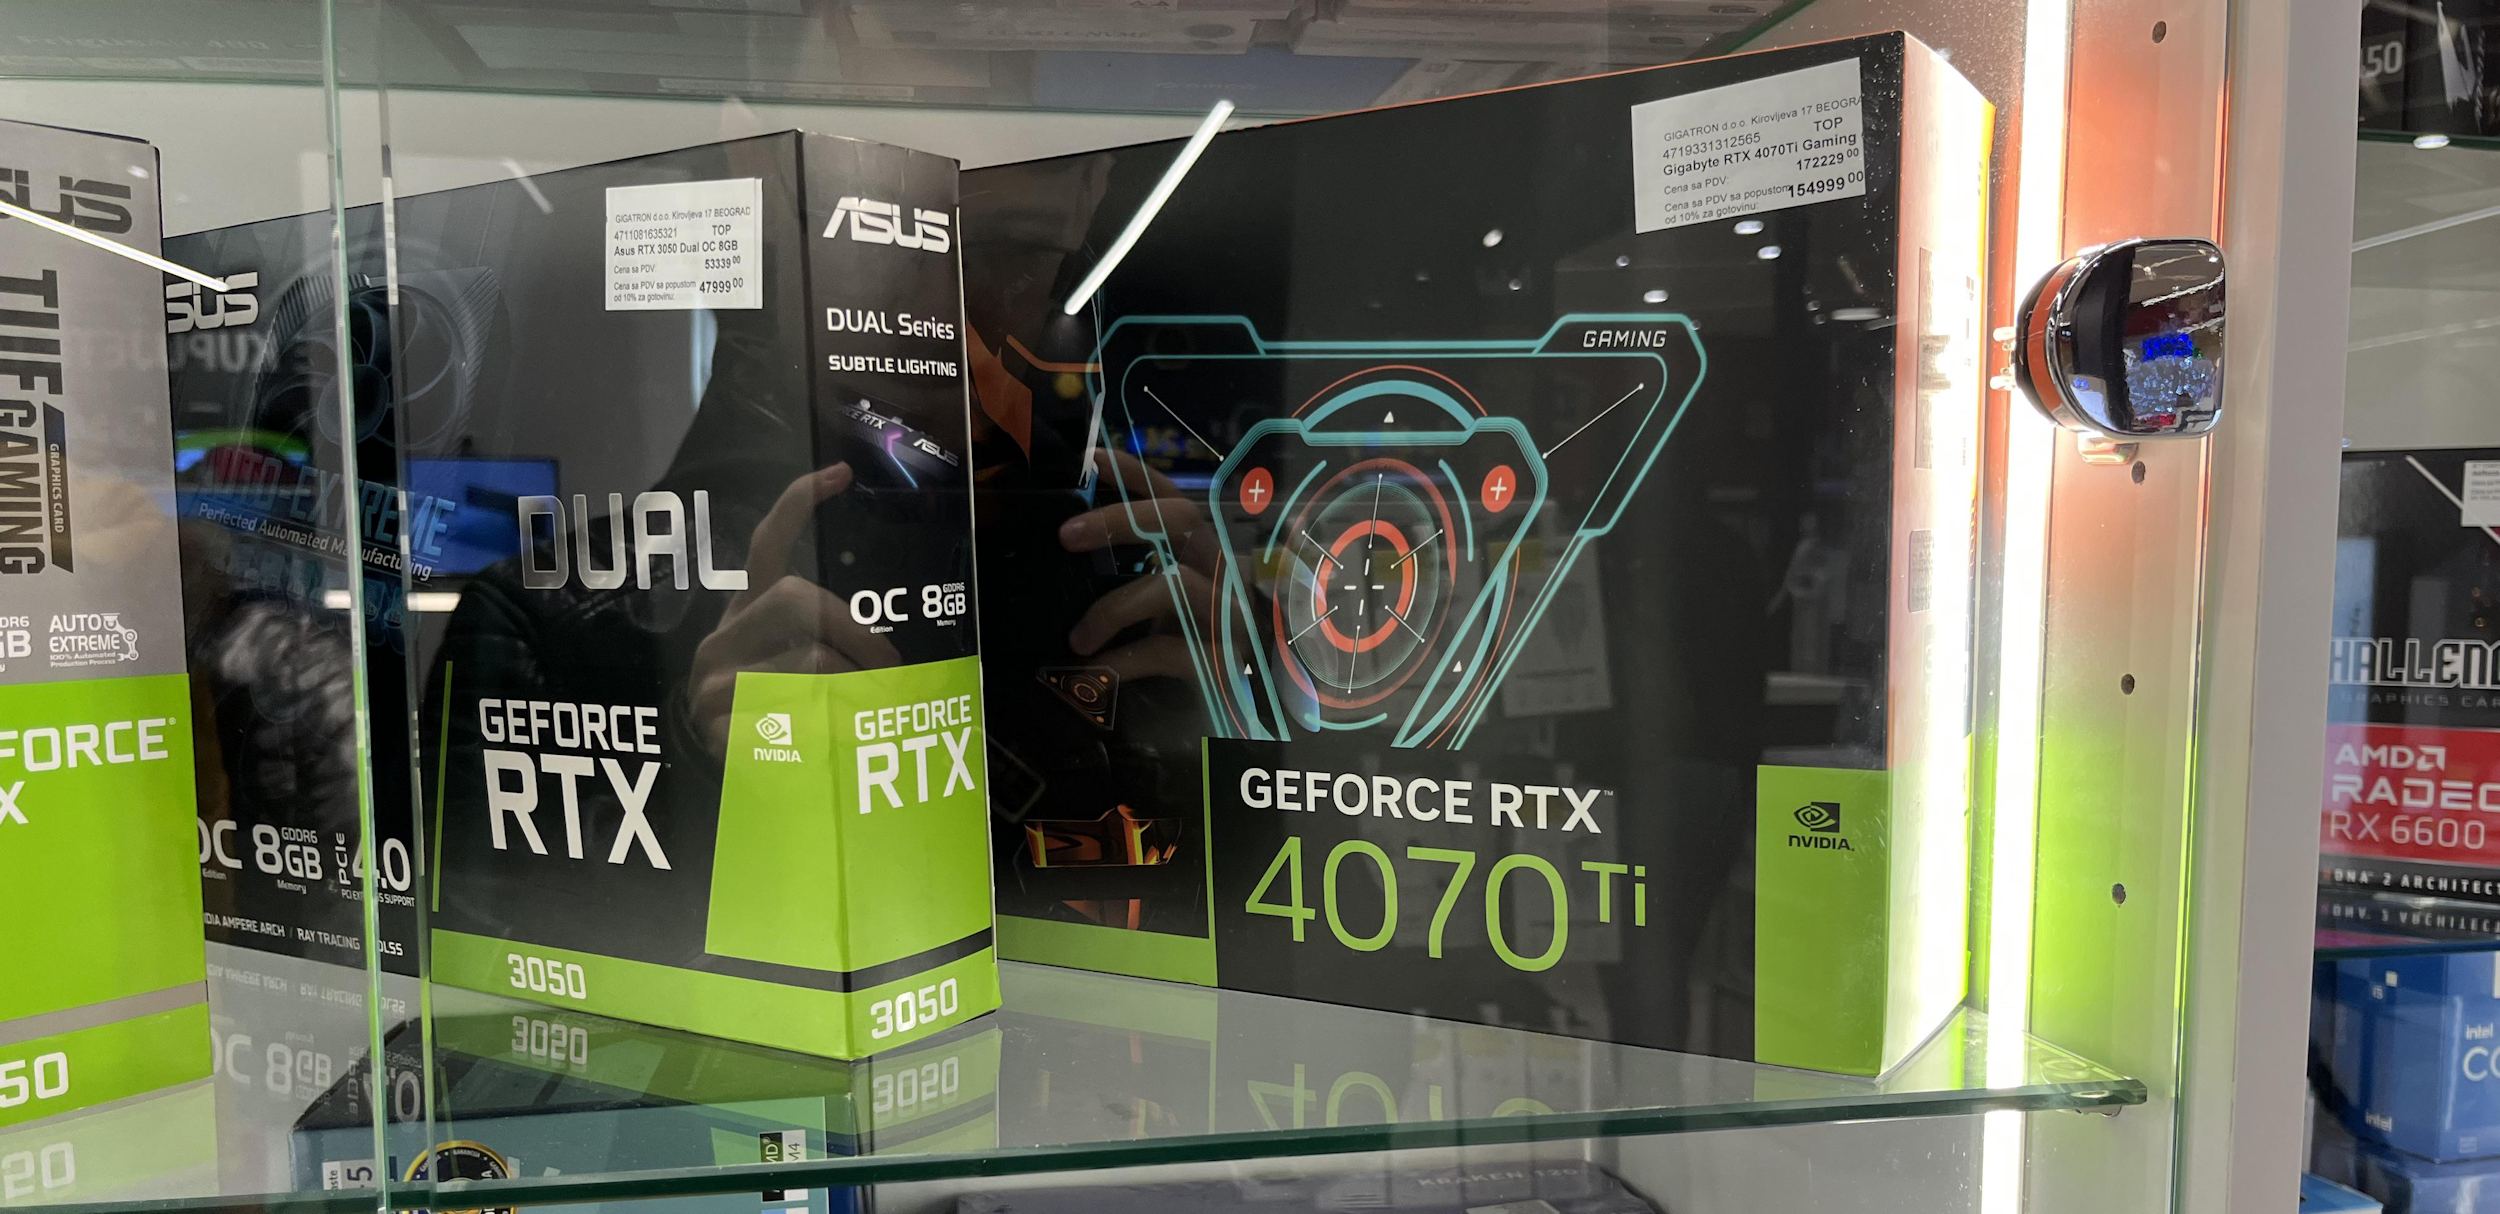 NVIDIA GeForce RTX 4070 Ti is already on sale in Serbia, costs